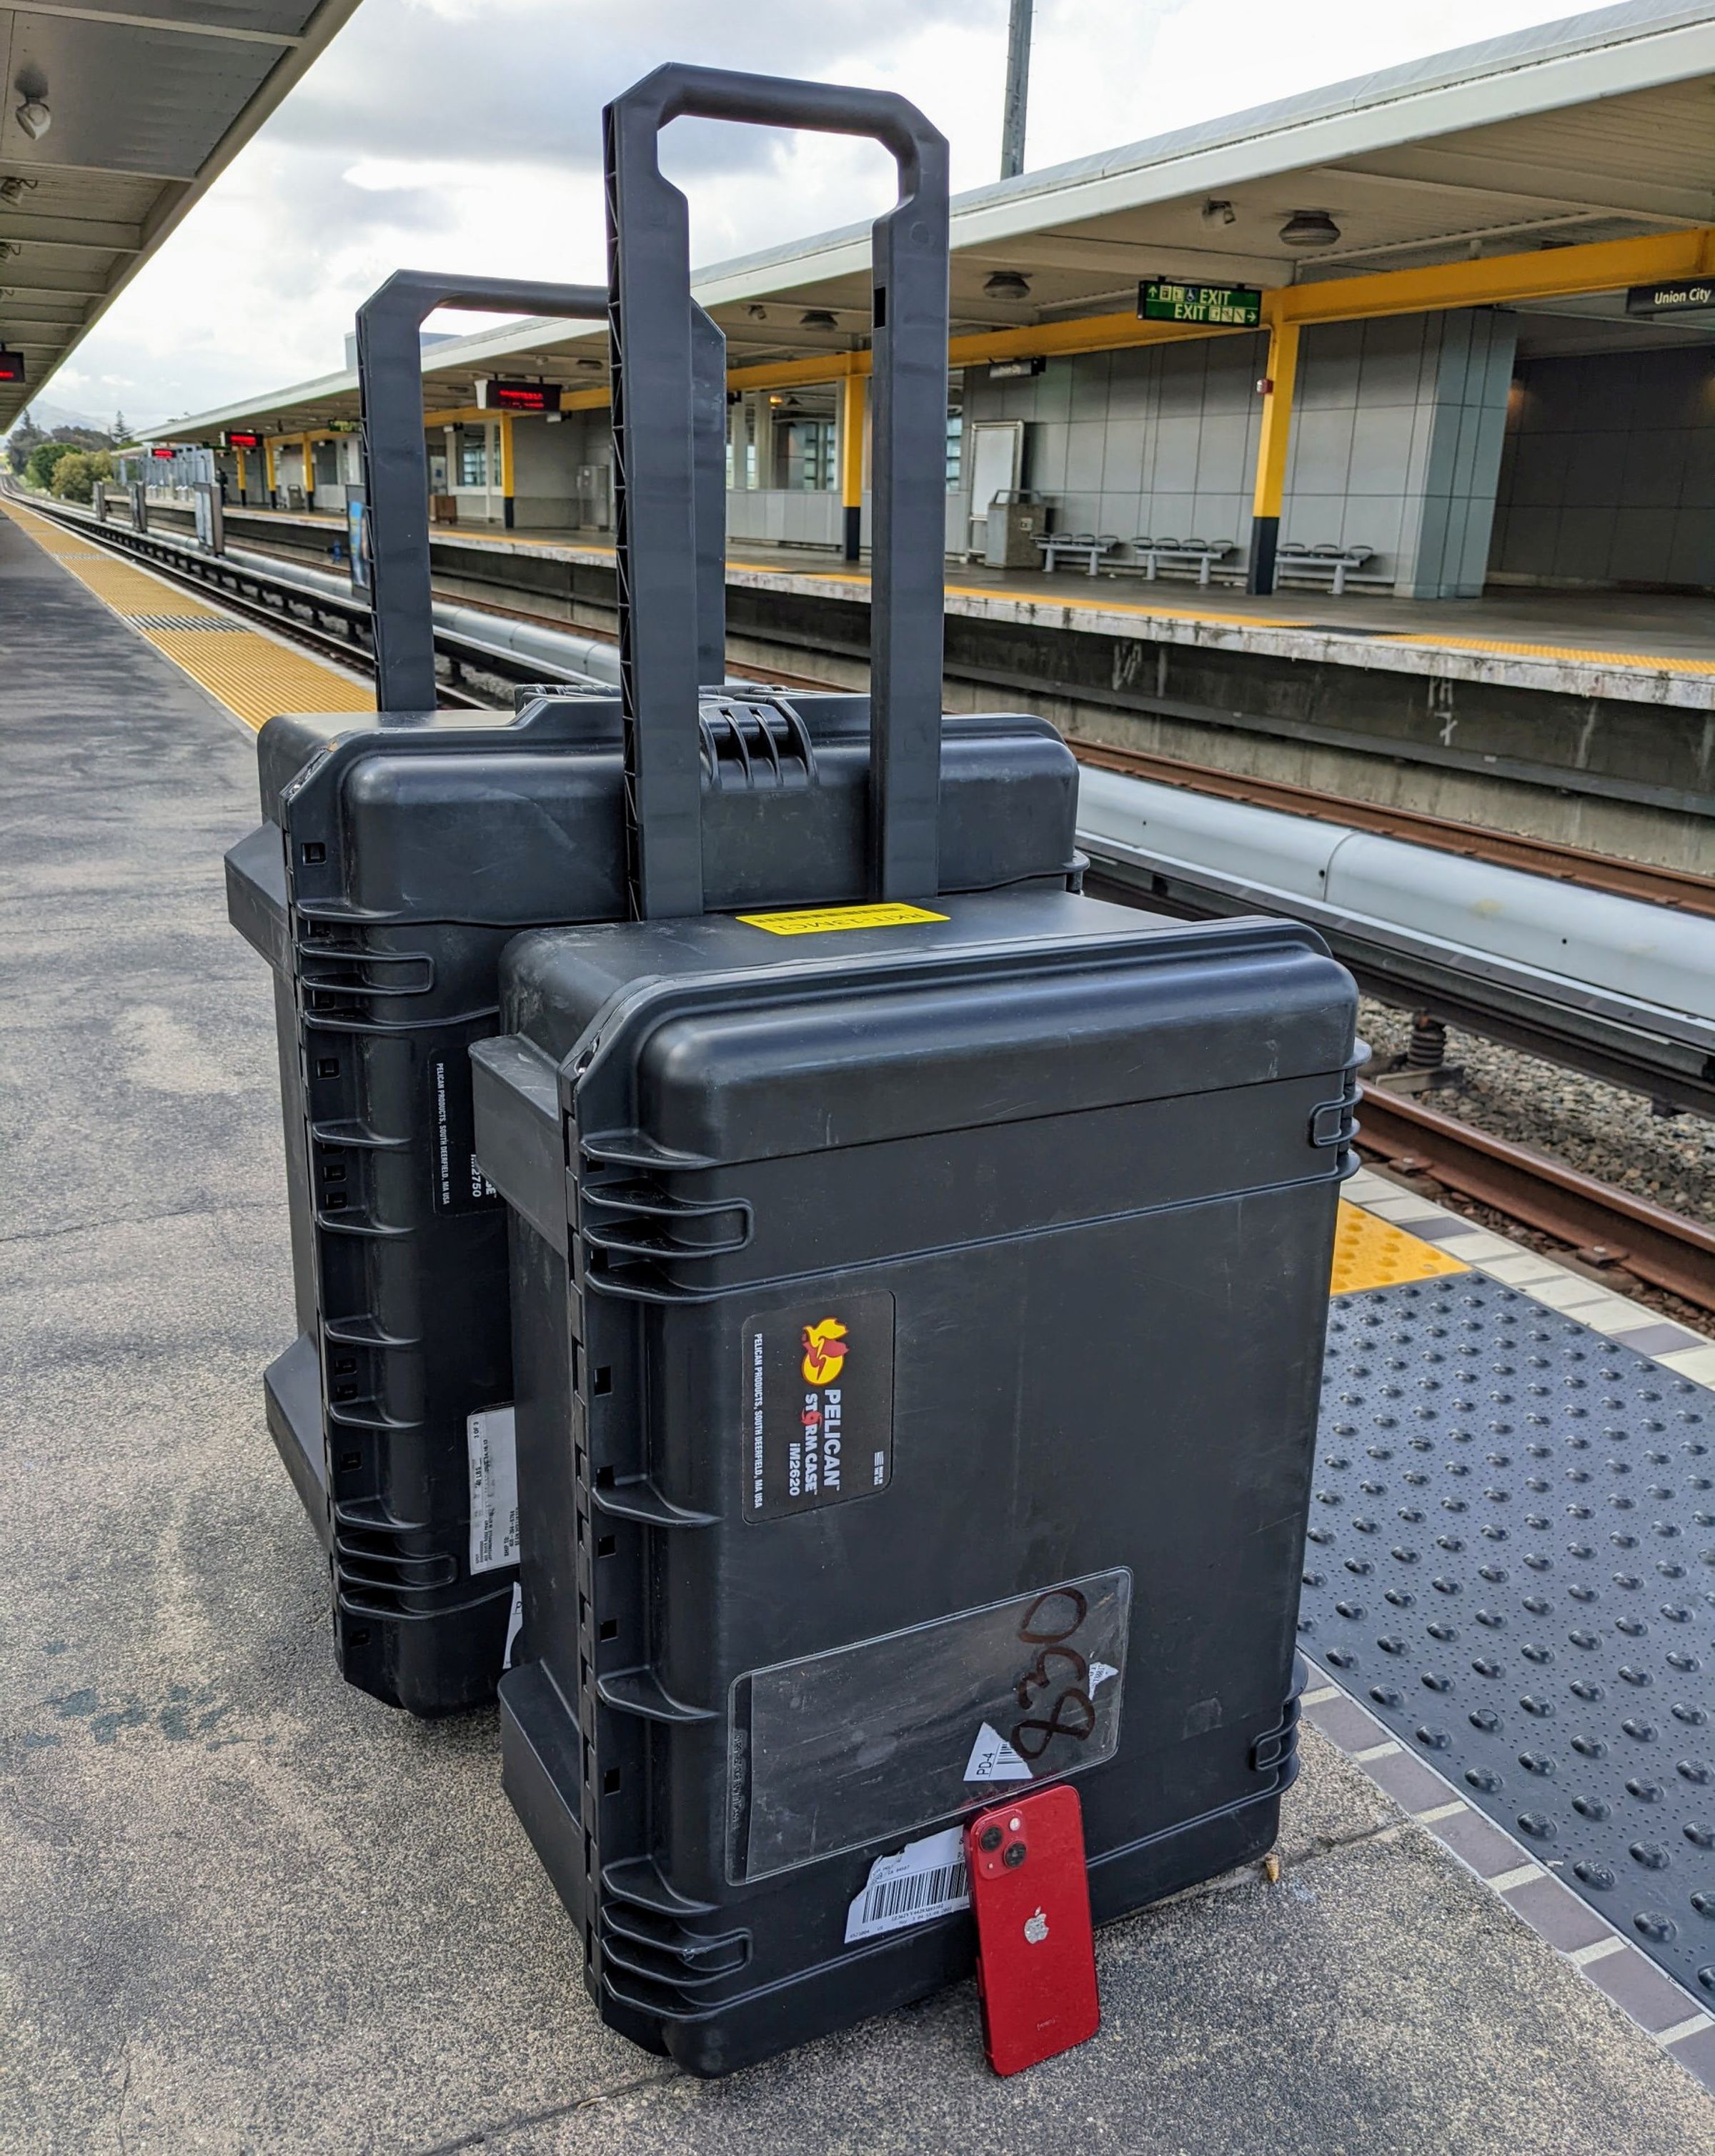 Two Pelican cases sit on a train platform, with a tiny red iPhone 13 mini next to them for scale.